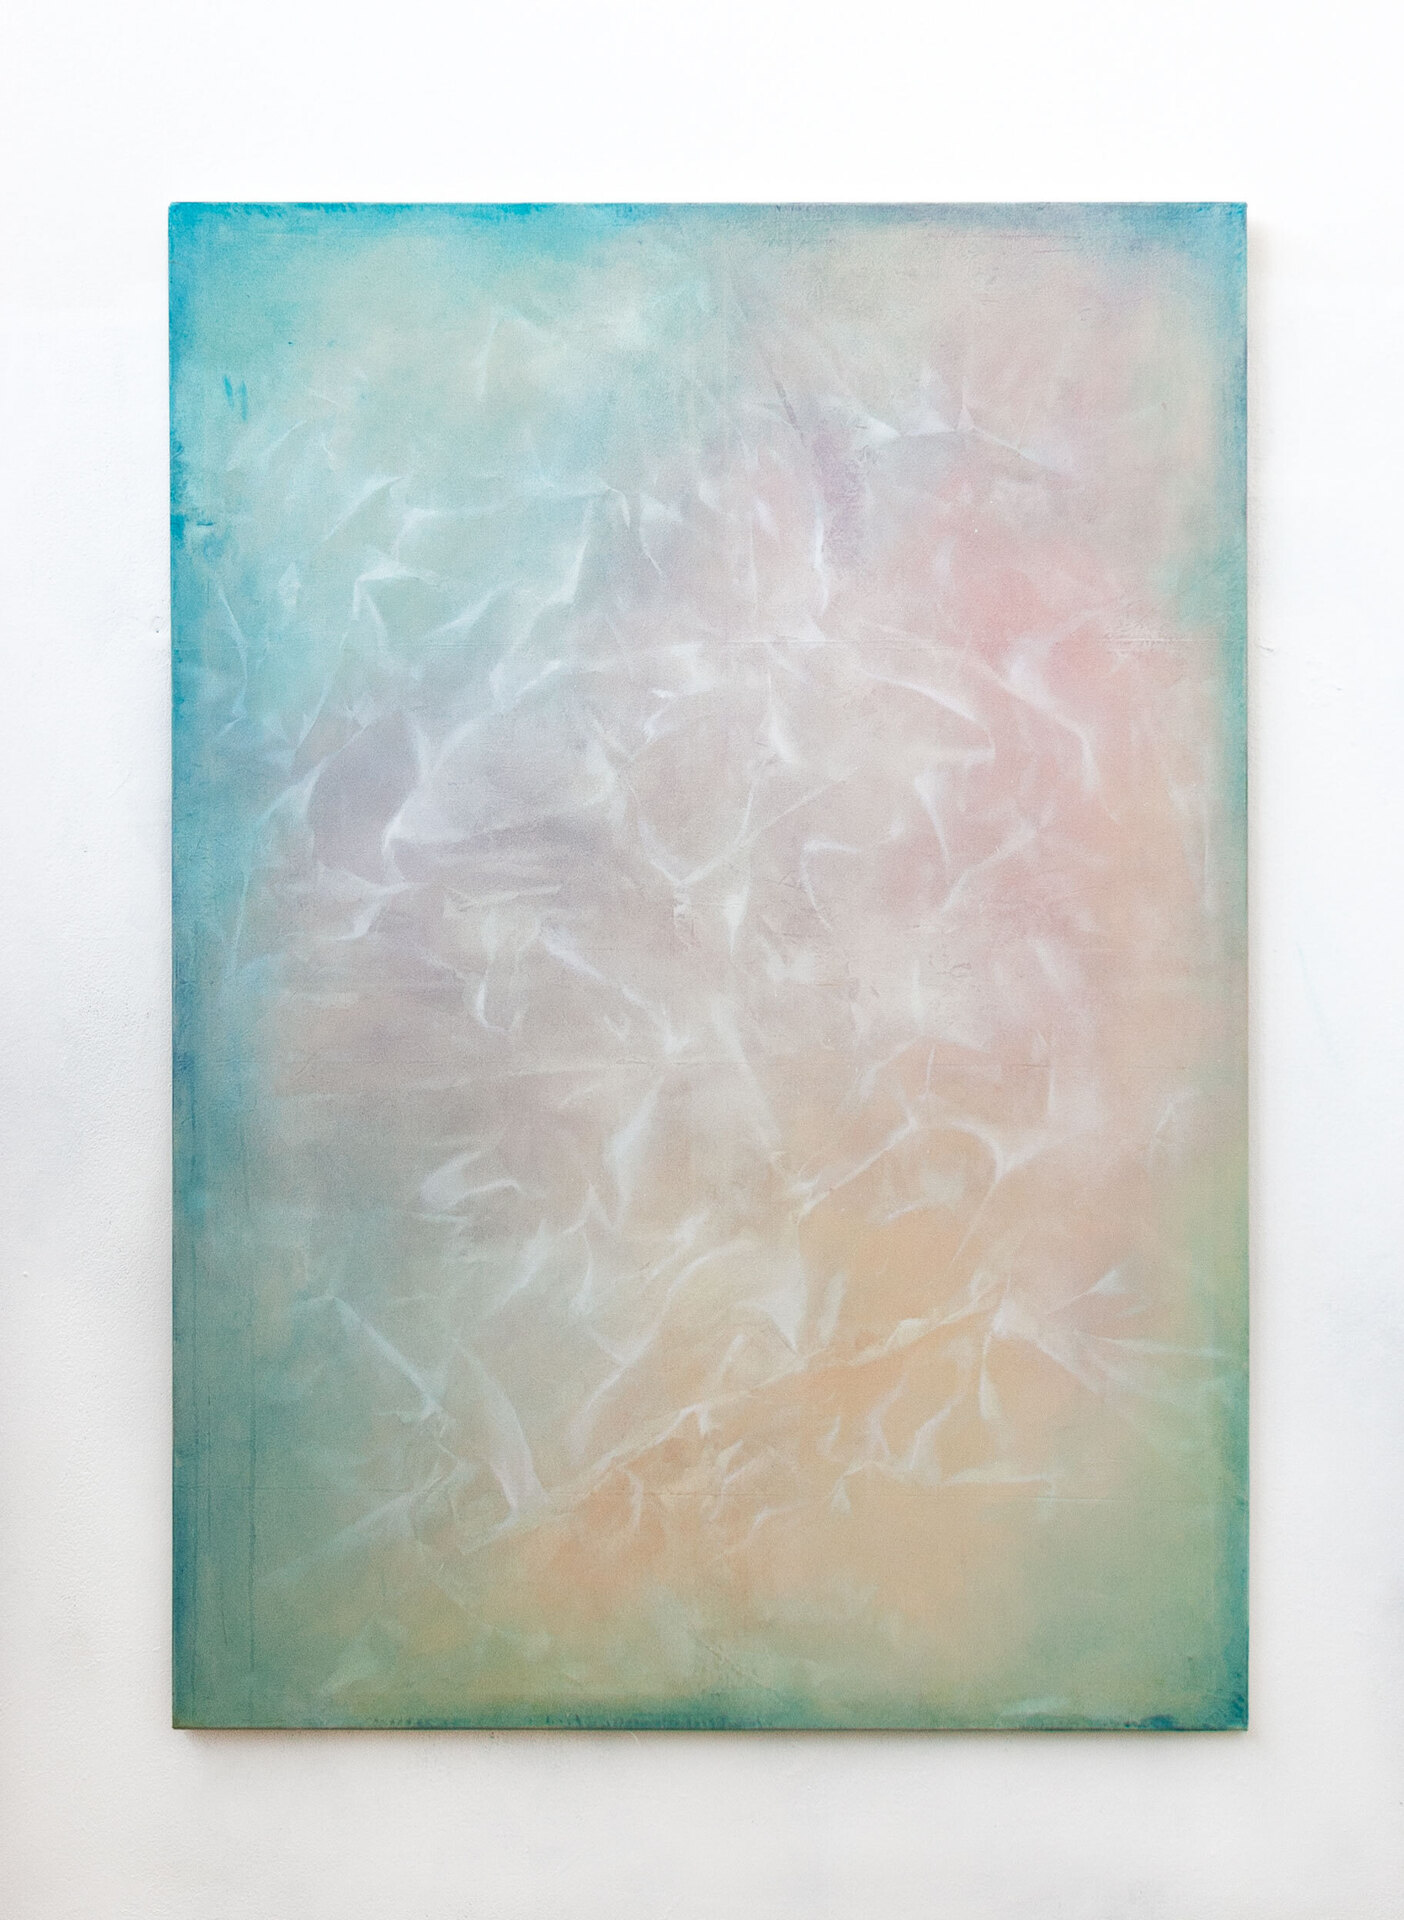 Johanna Binder, untitled, 2020, oil and lacquer on canvas, 170x120 cm